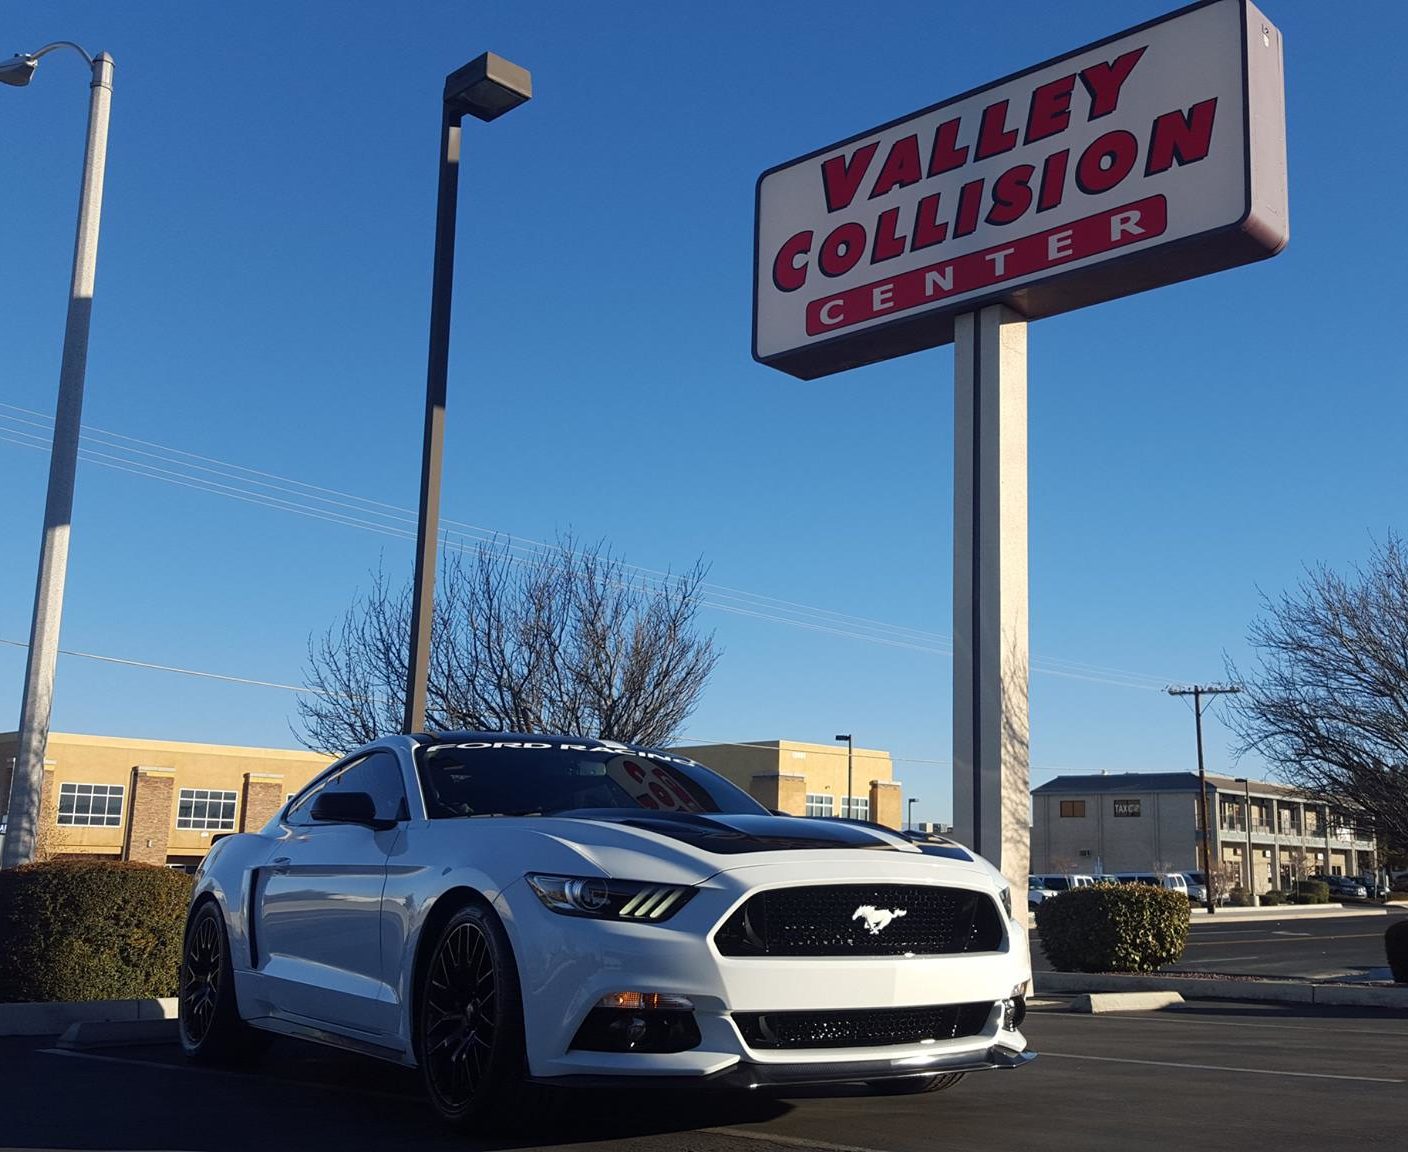 valley collision center parking lot sign